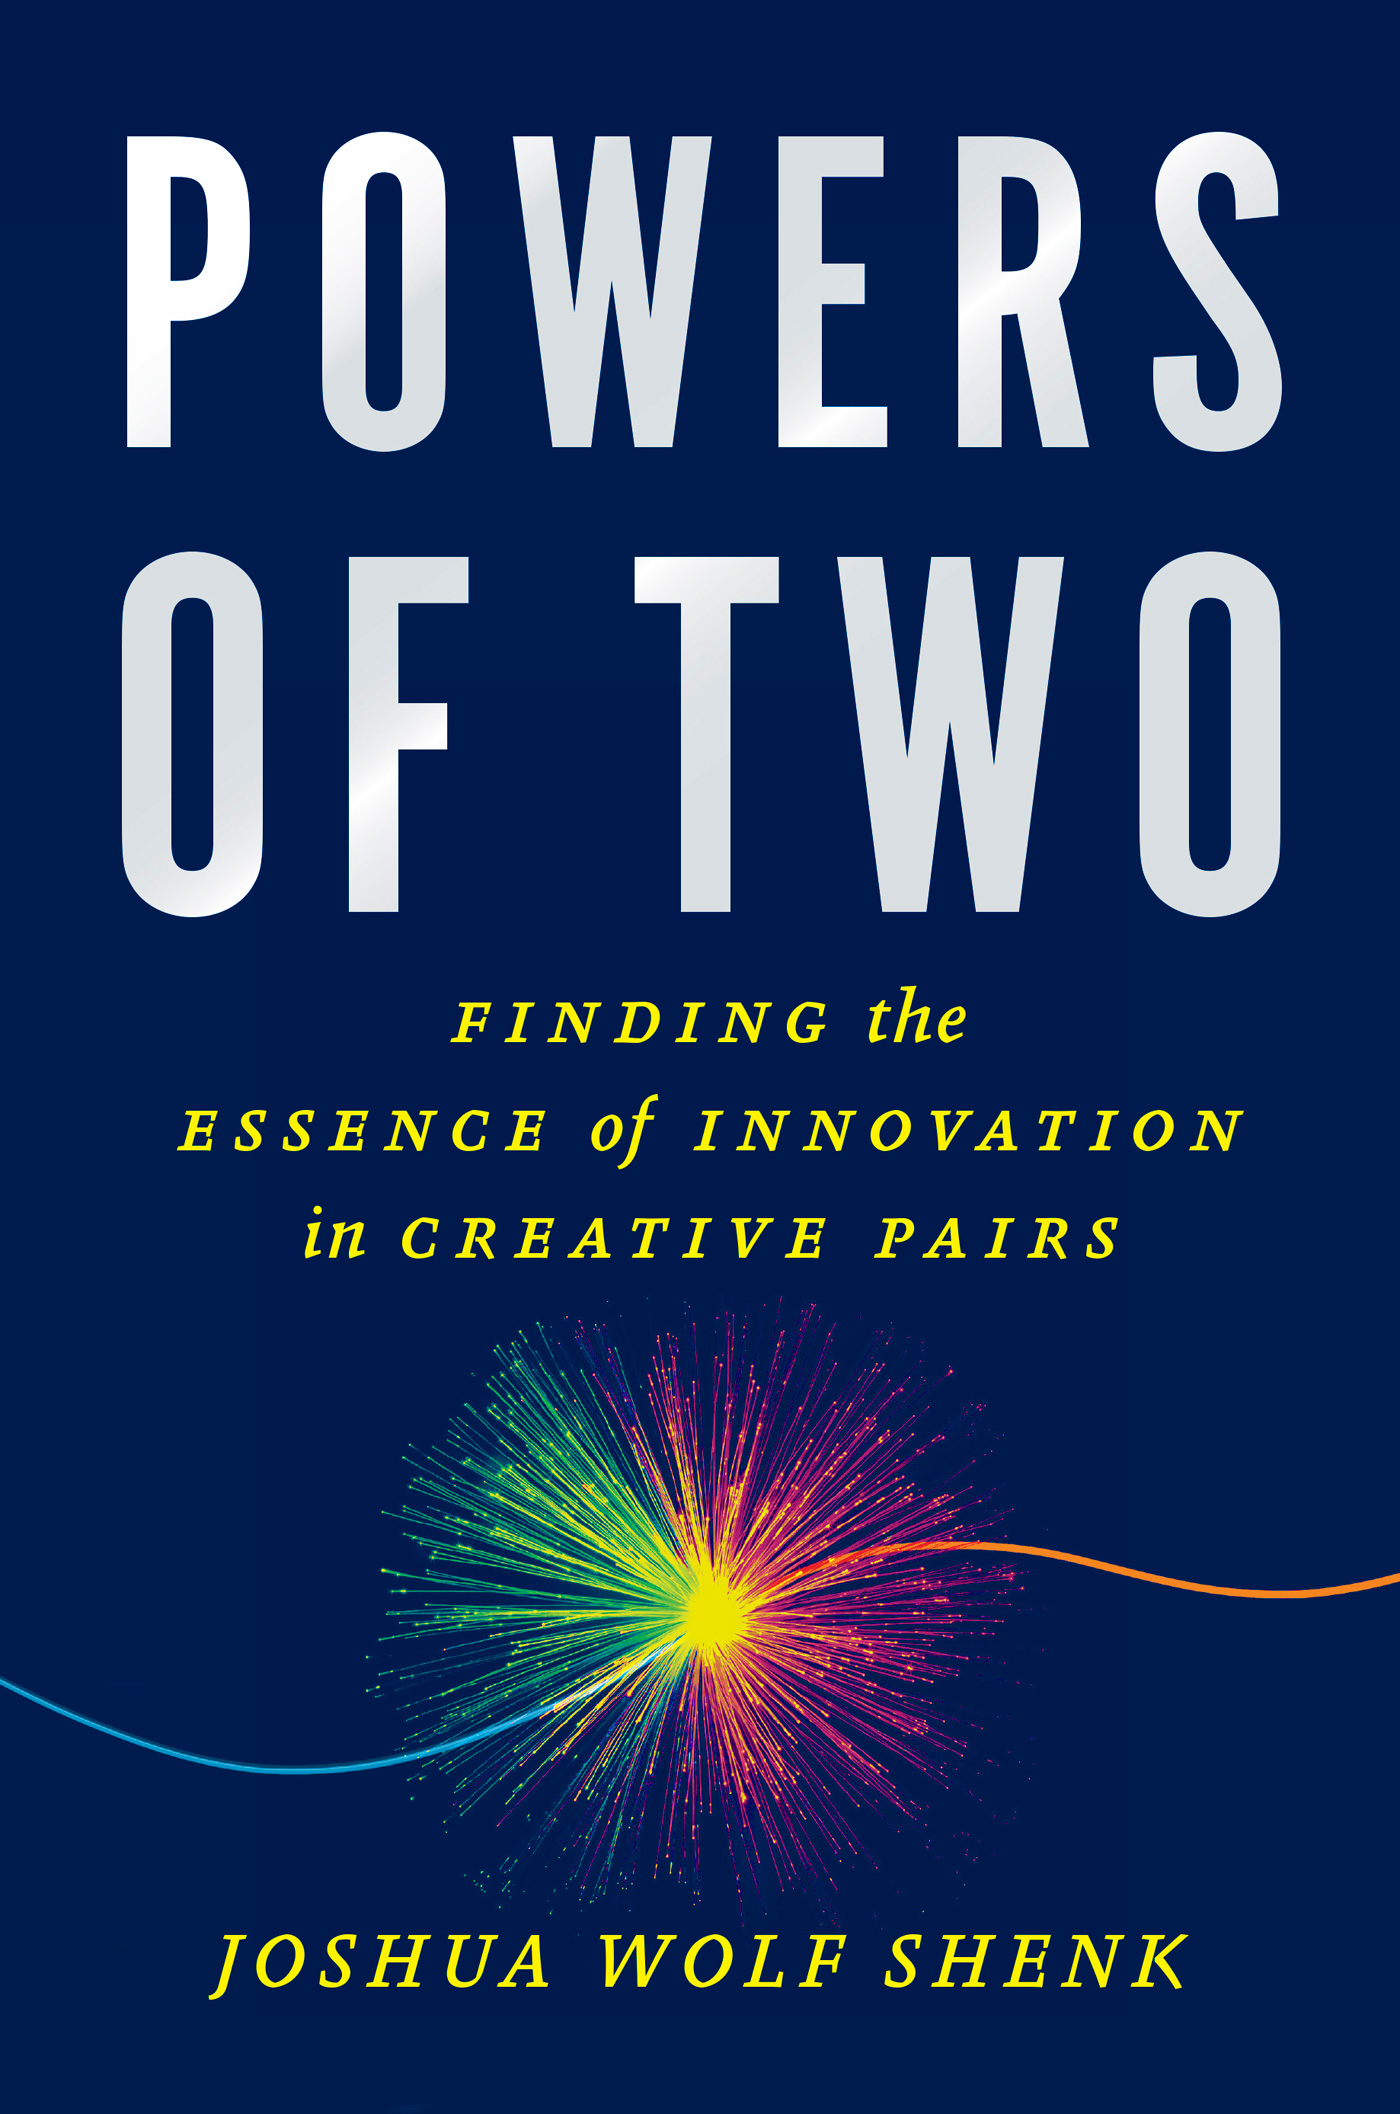 Book Launch: Powers of Two by Joshua Wolf Shenk, with Eamon Dolan